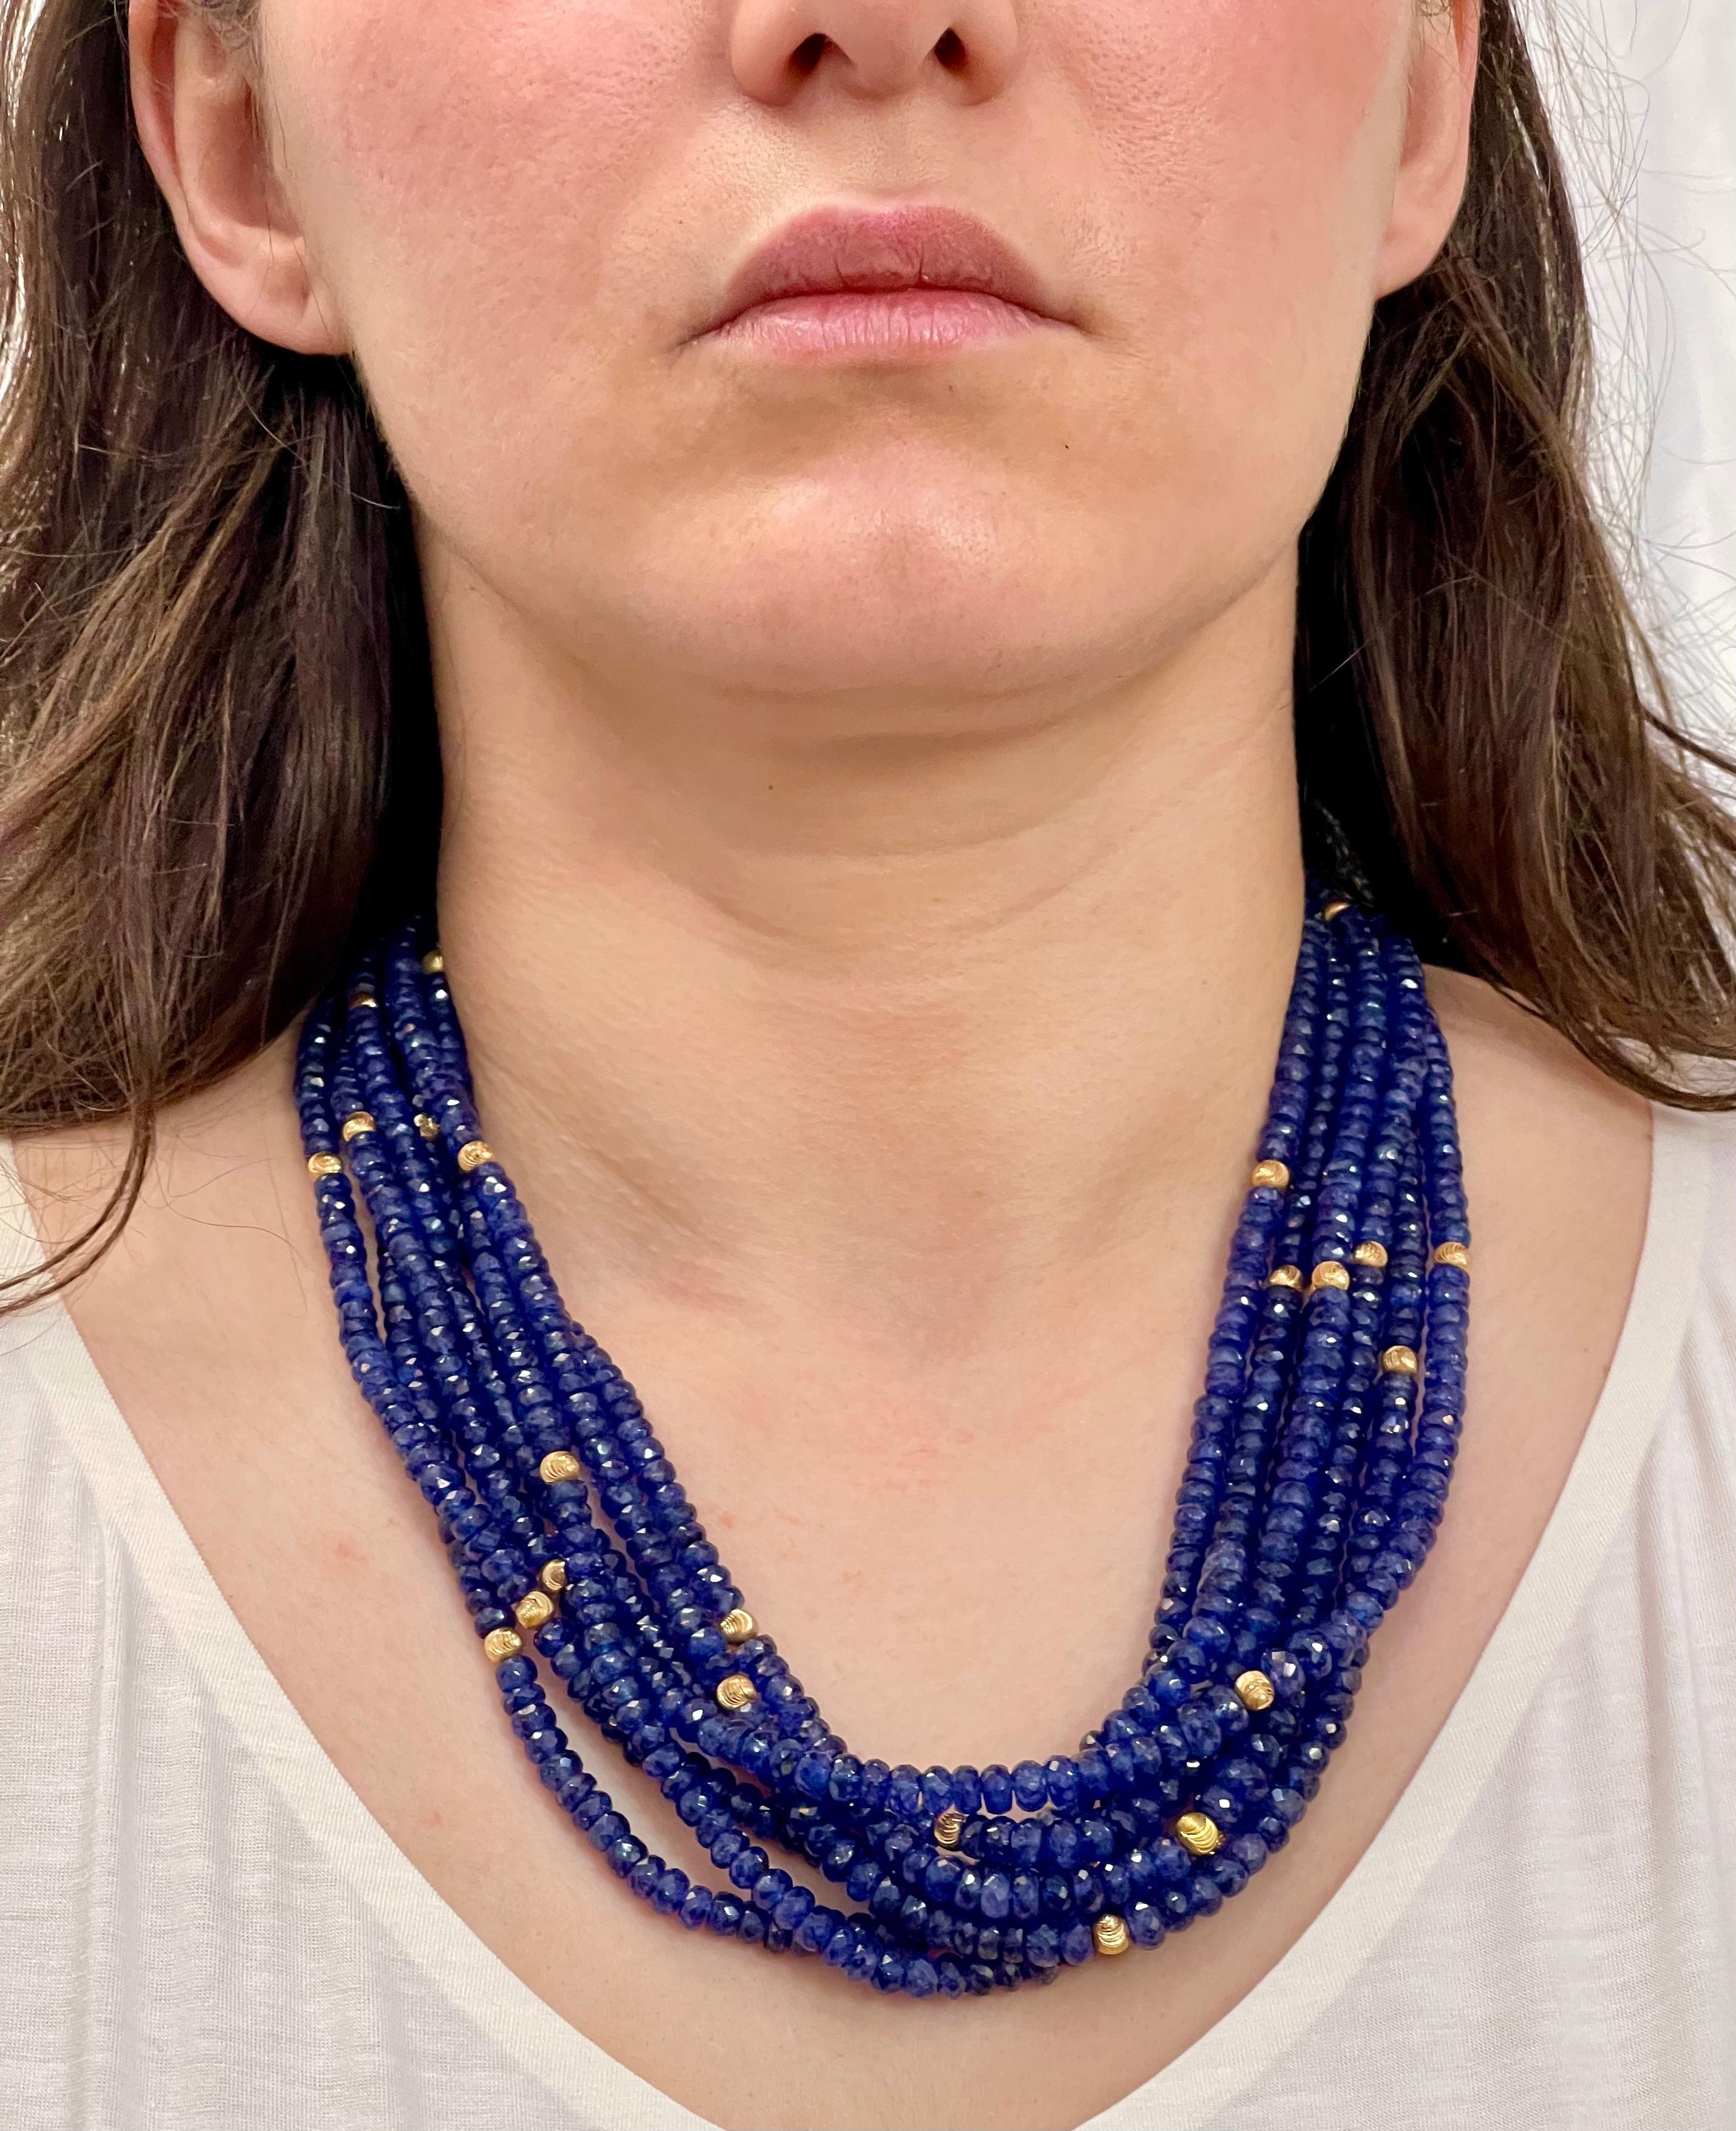 Twisted 1275 Ct Natural Tanzanite Bead Seven Strand Necklace + 15 Gm 14 K Y Gold For Sale 1